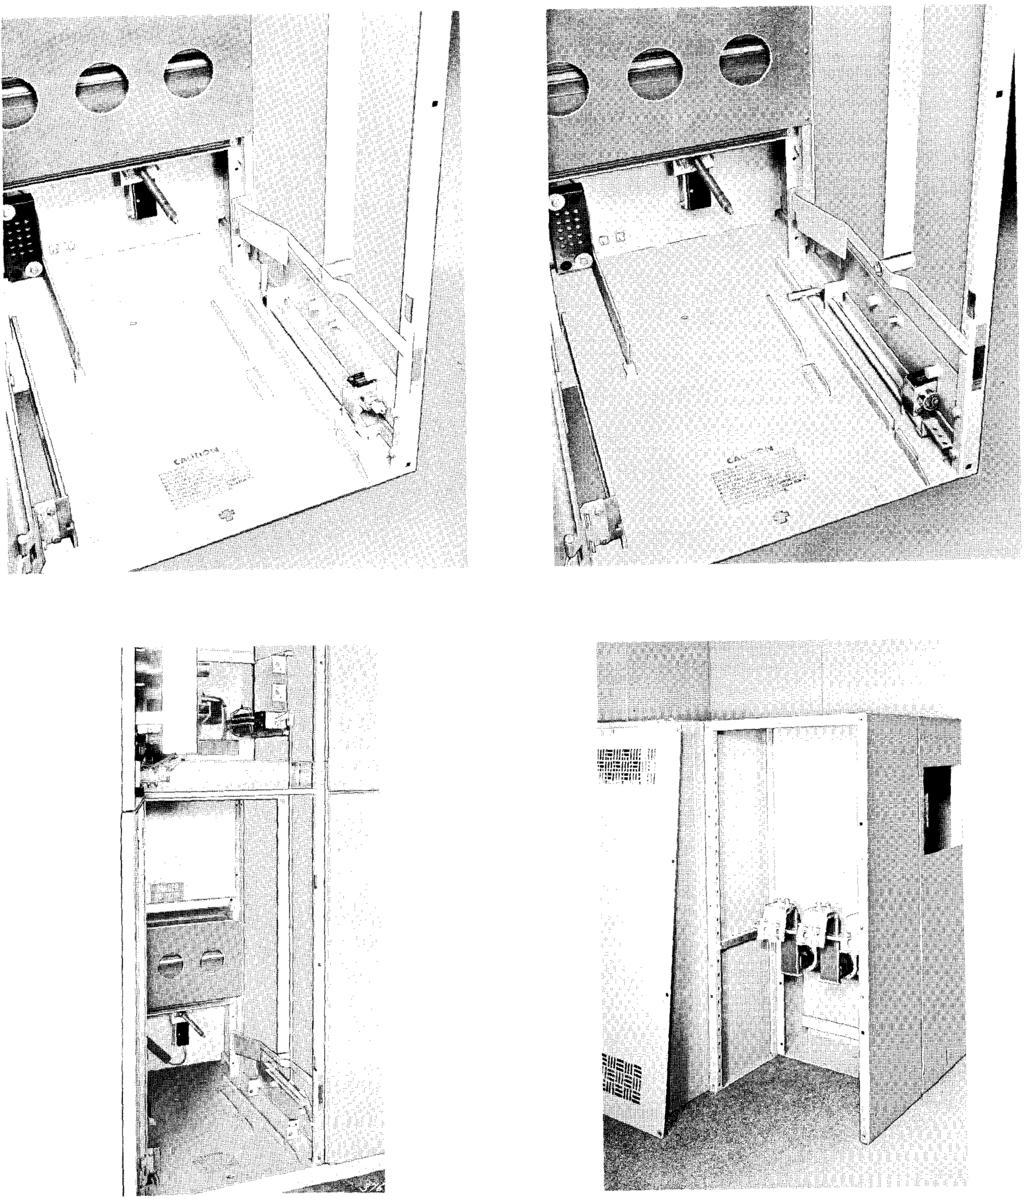 28 Fig. 21. ndoor and Outdoor: Close-up, Position nterlock (Unlocked) Fig. 23. ndoor and Outdoor: 5 KV Breaker Housing with MOC Sw Fig.